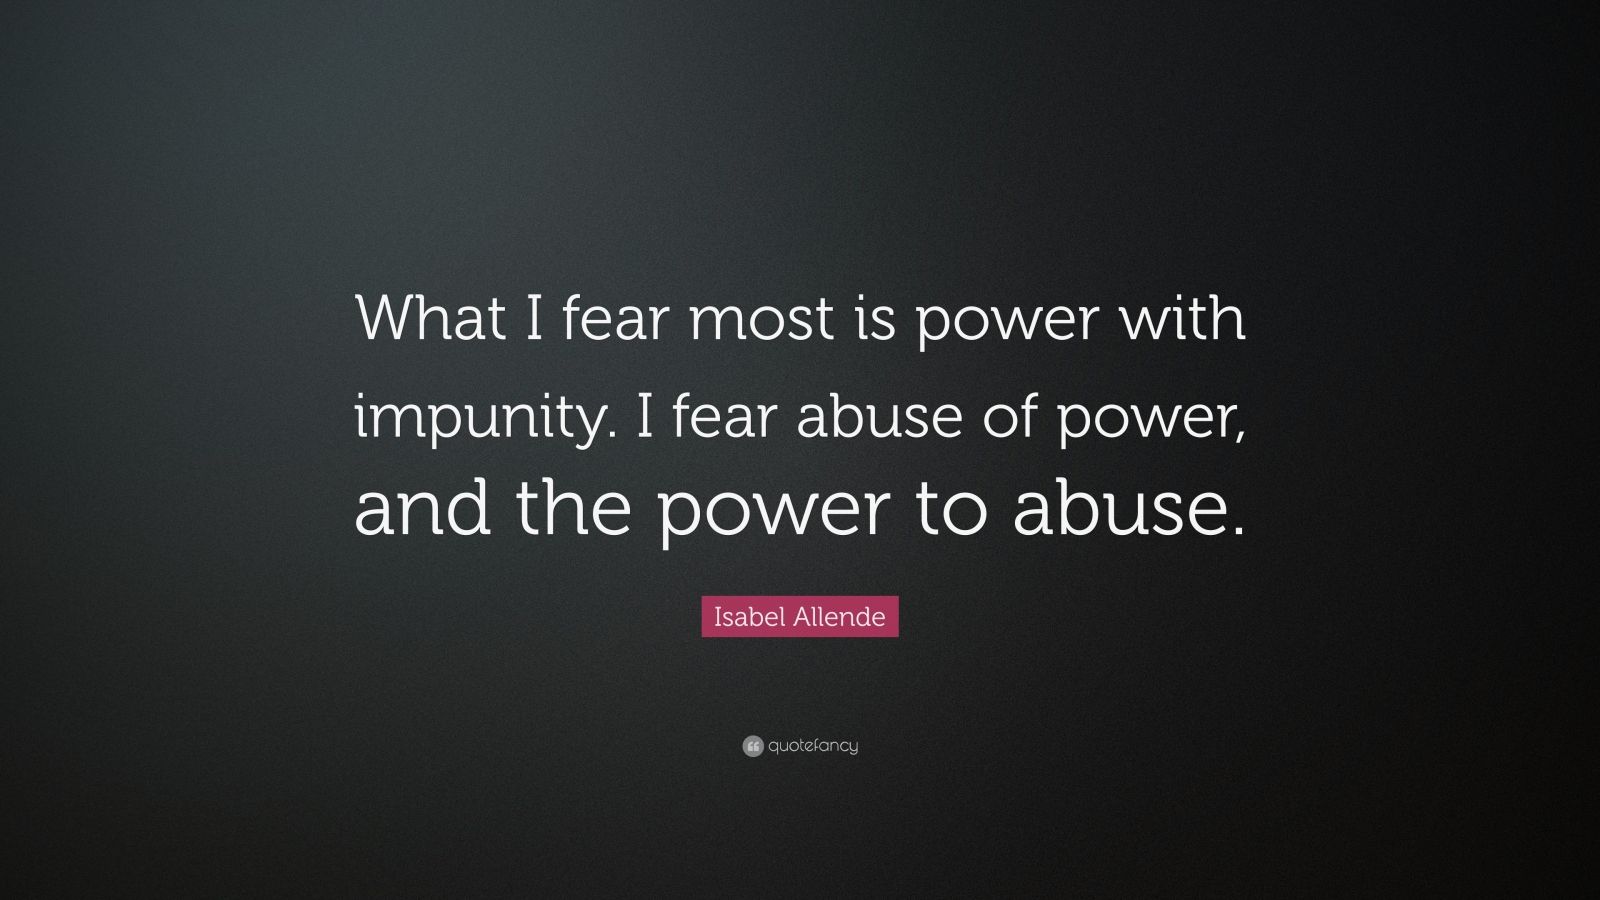 Isabel Allende Quote: “What I fear most is power with impunity. I fear ...